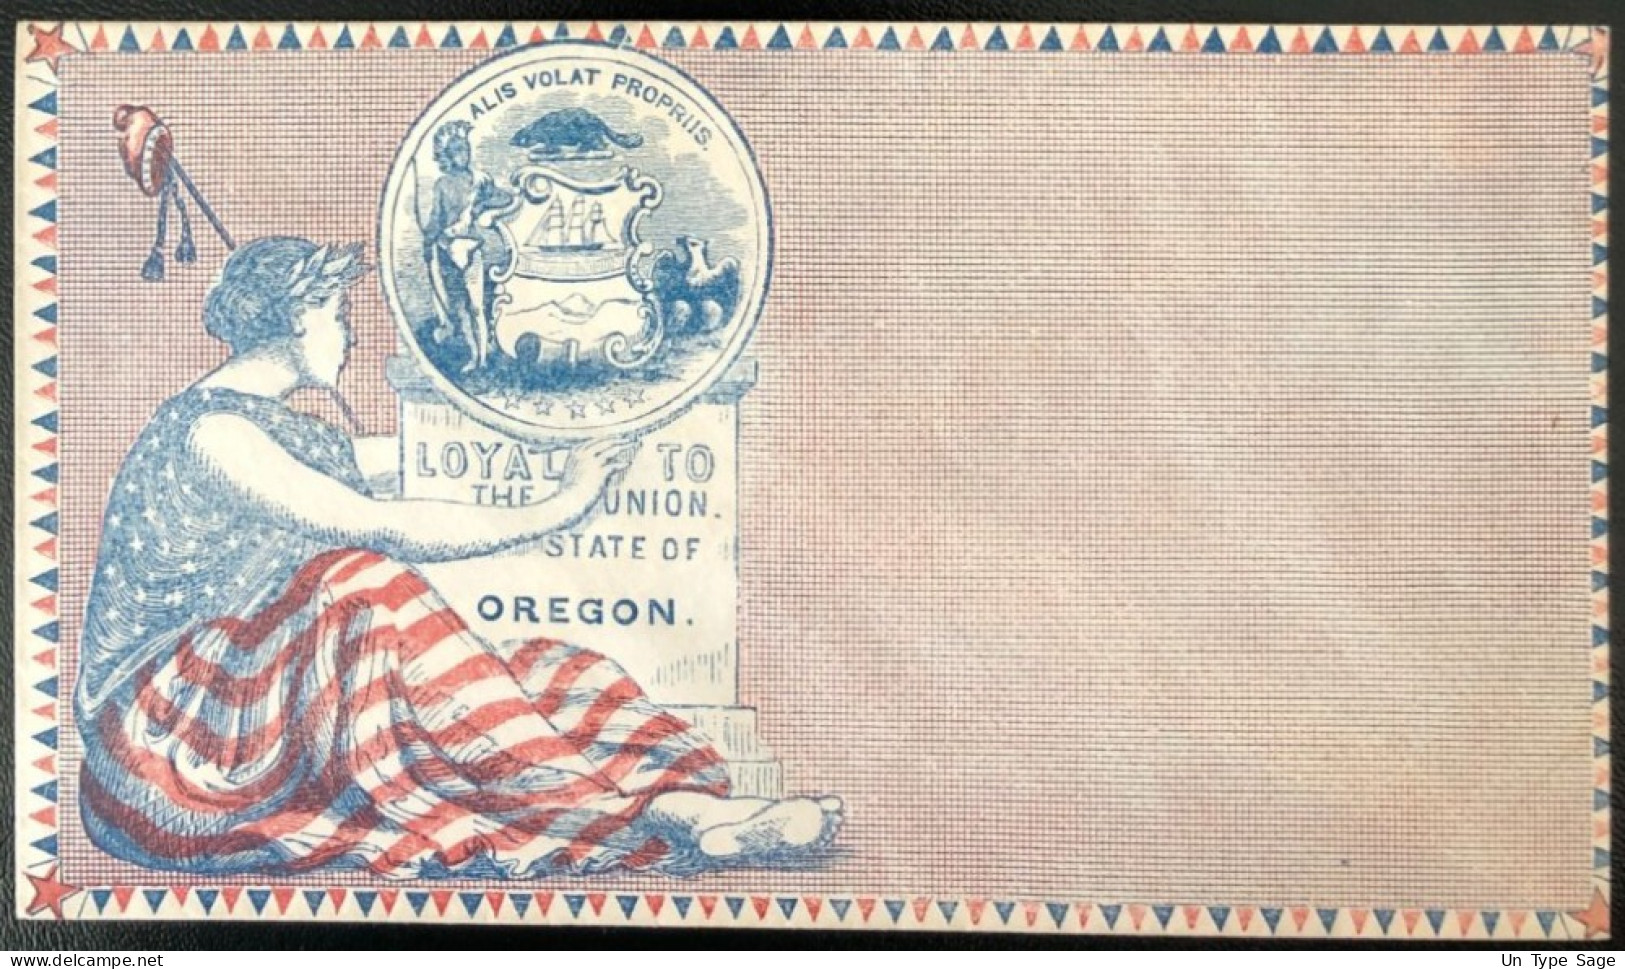 U.S.A, Civil War, Patriotic Cover - "Loyal To The Union. State Of OREGON" - Unused - (C455) - Poststempel